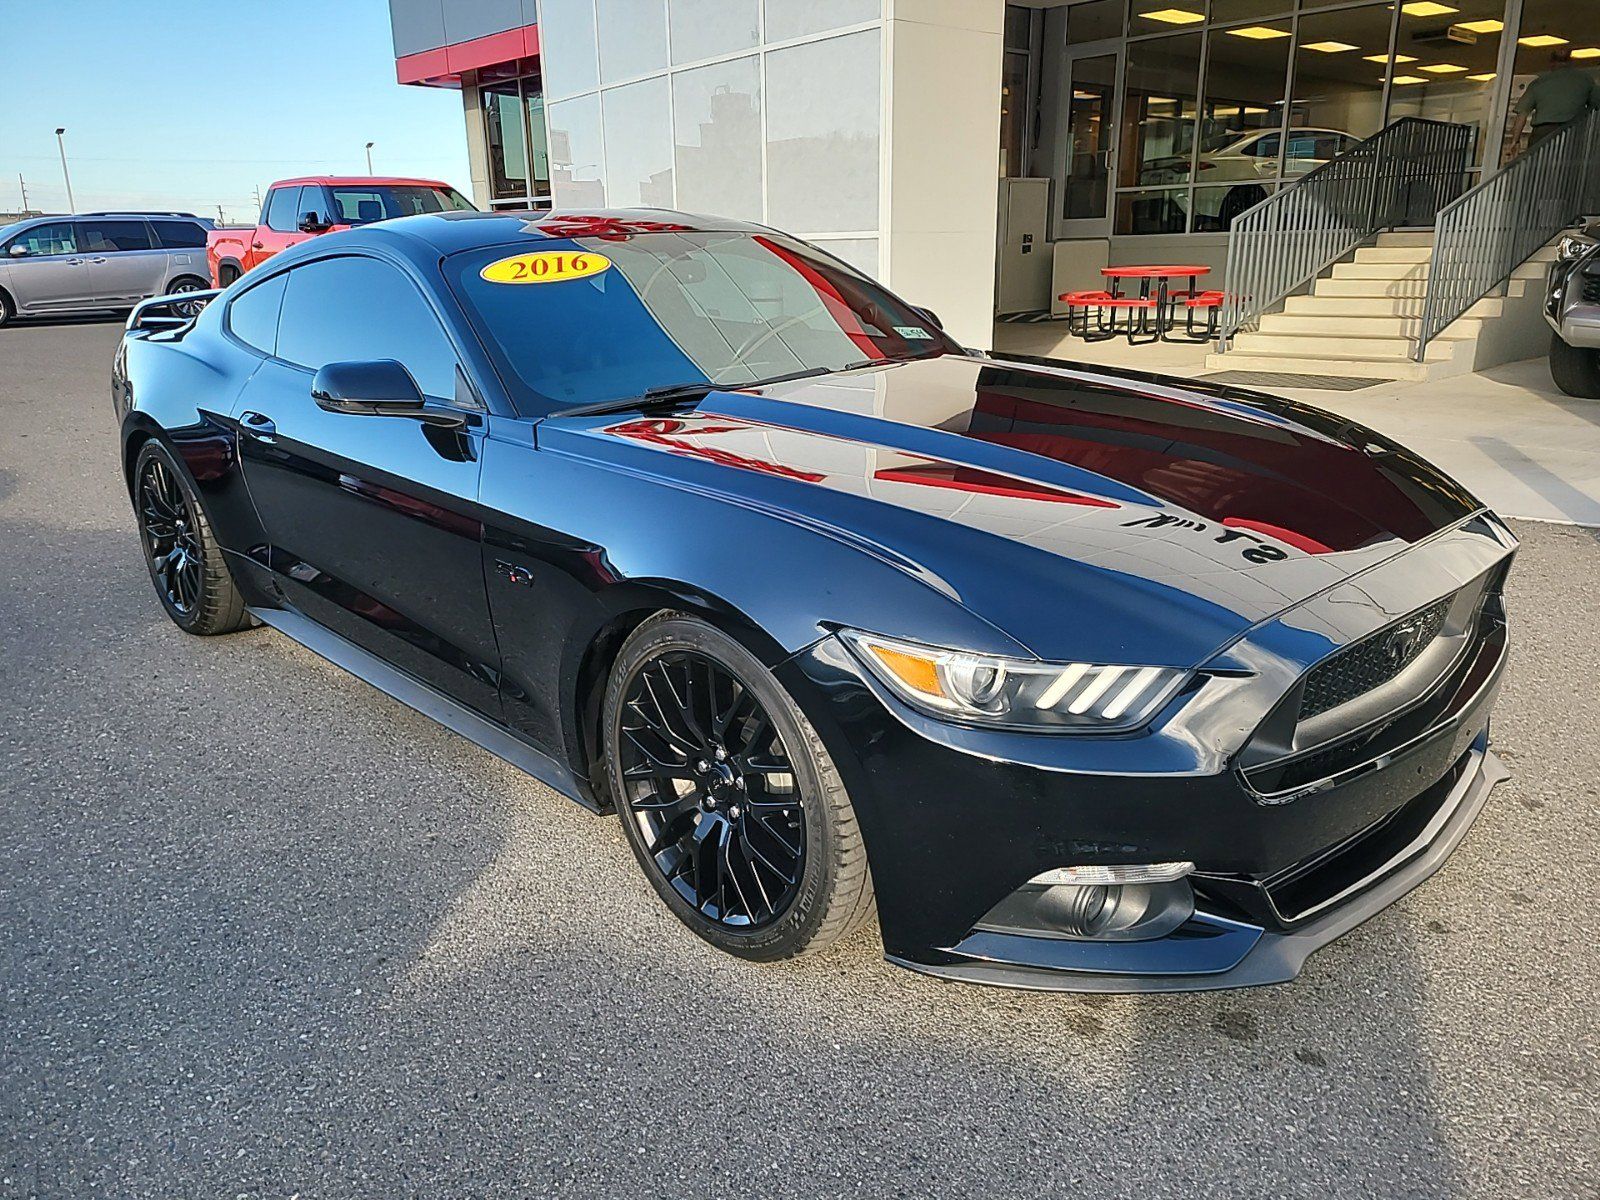 2016 - Ford - Mustang - $30,799